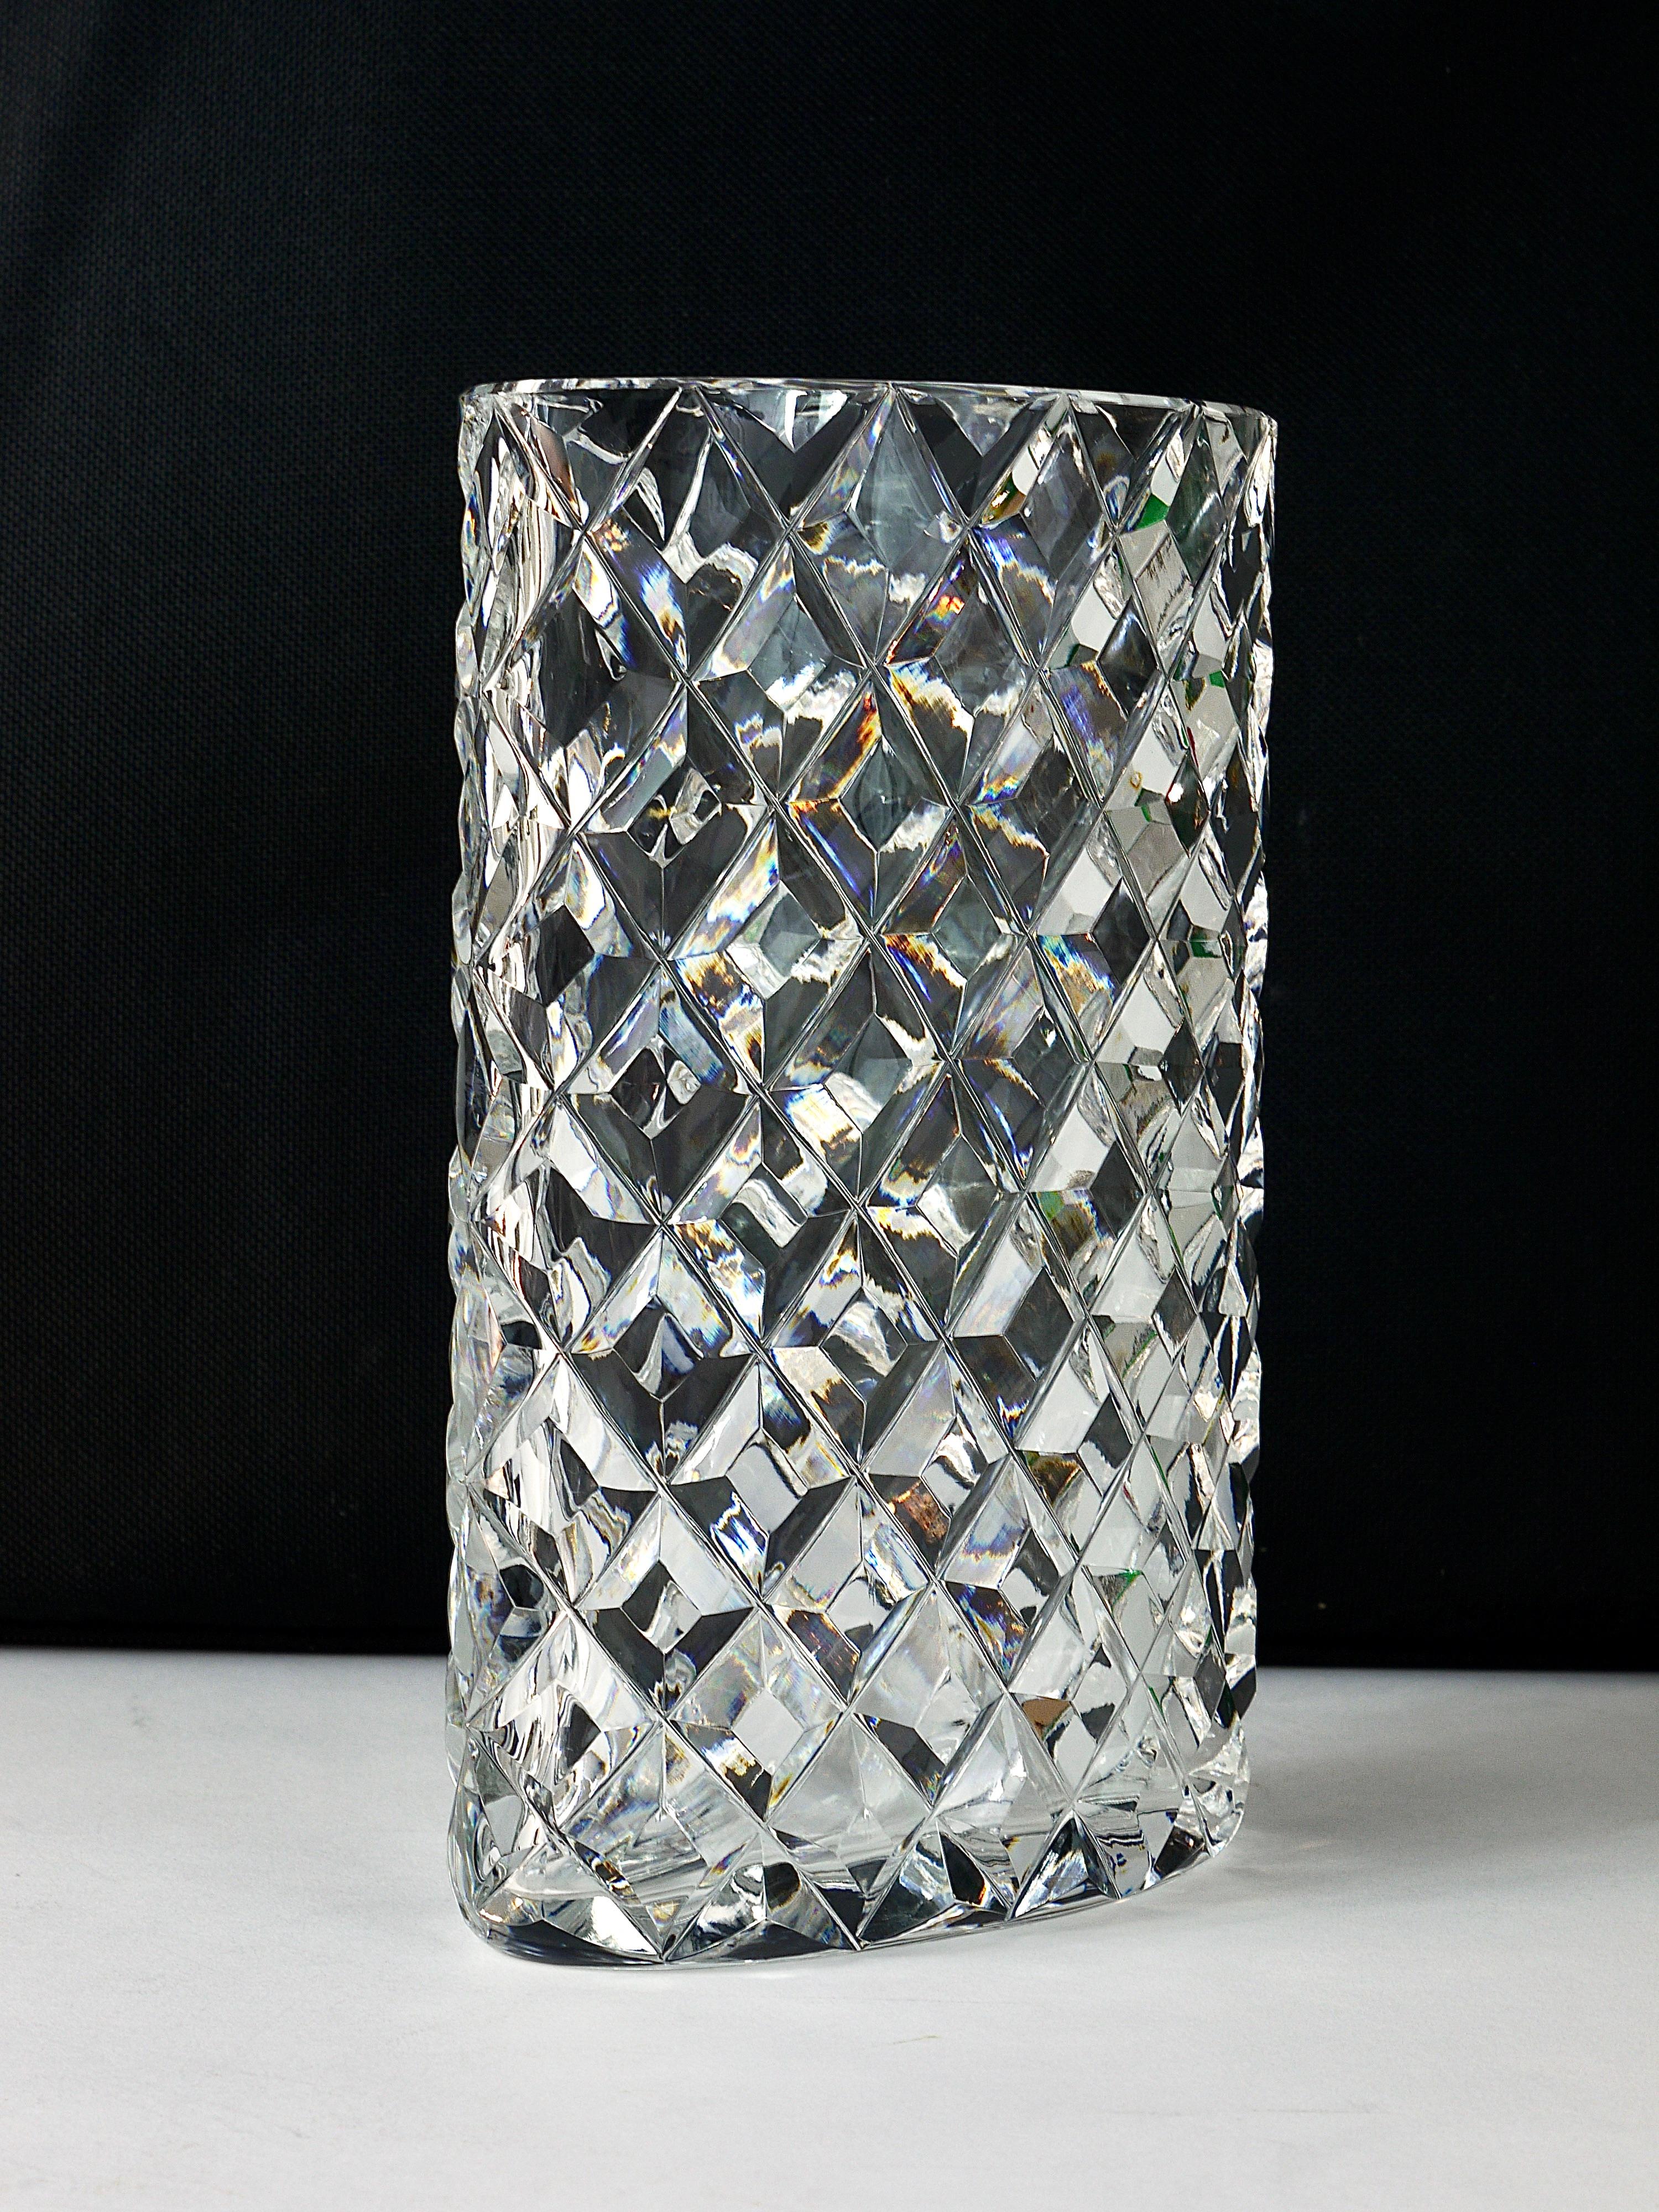 Sparkling Facetted Crystal Glass Vase by Claus Josef Riedel, Austria, 1970s For Sale 12